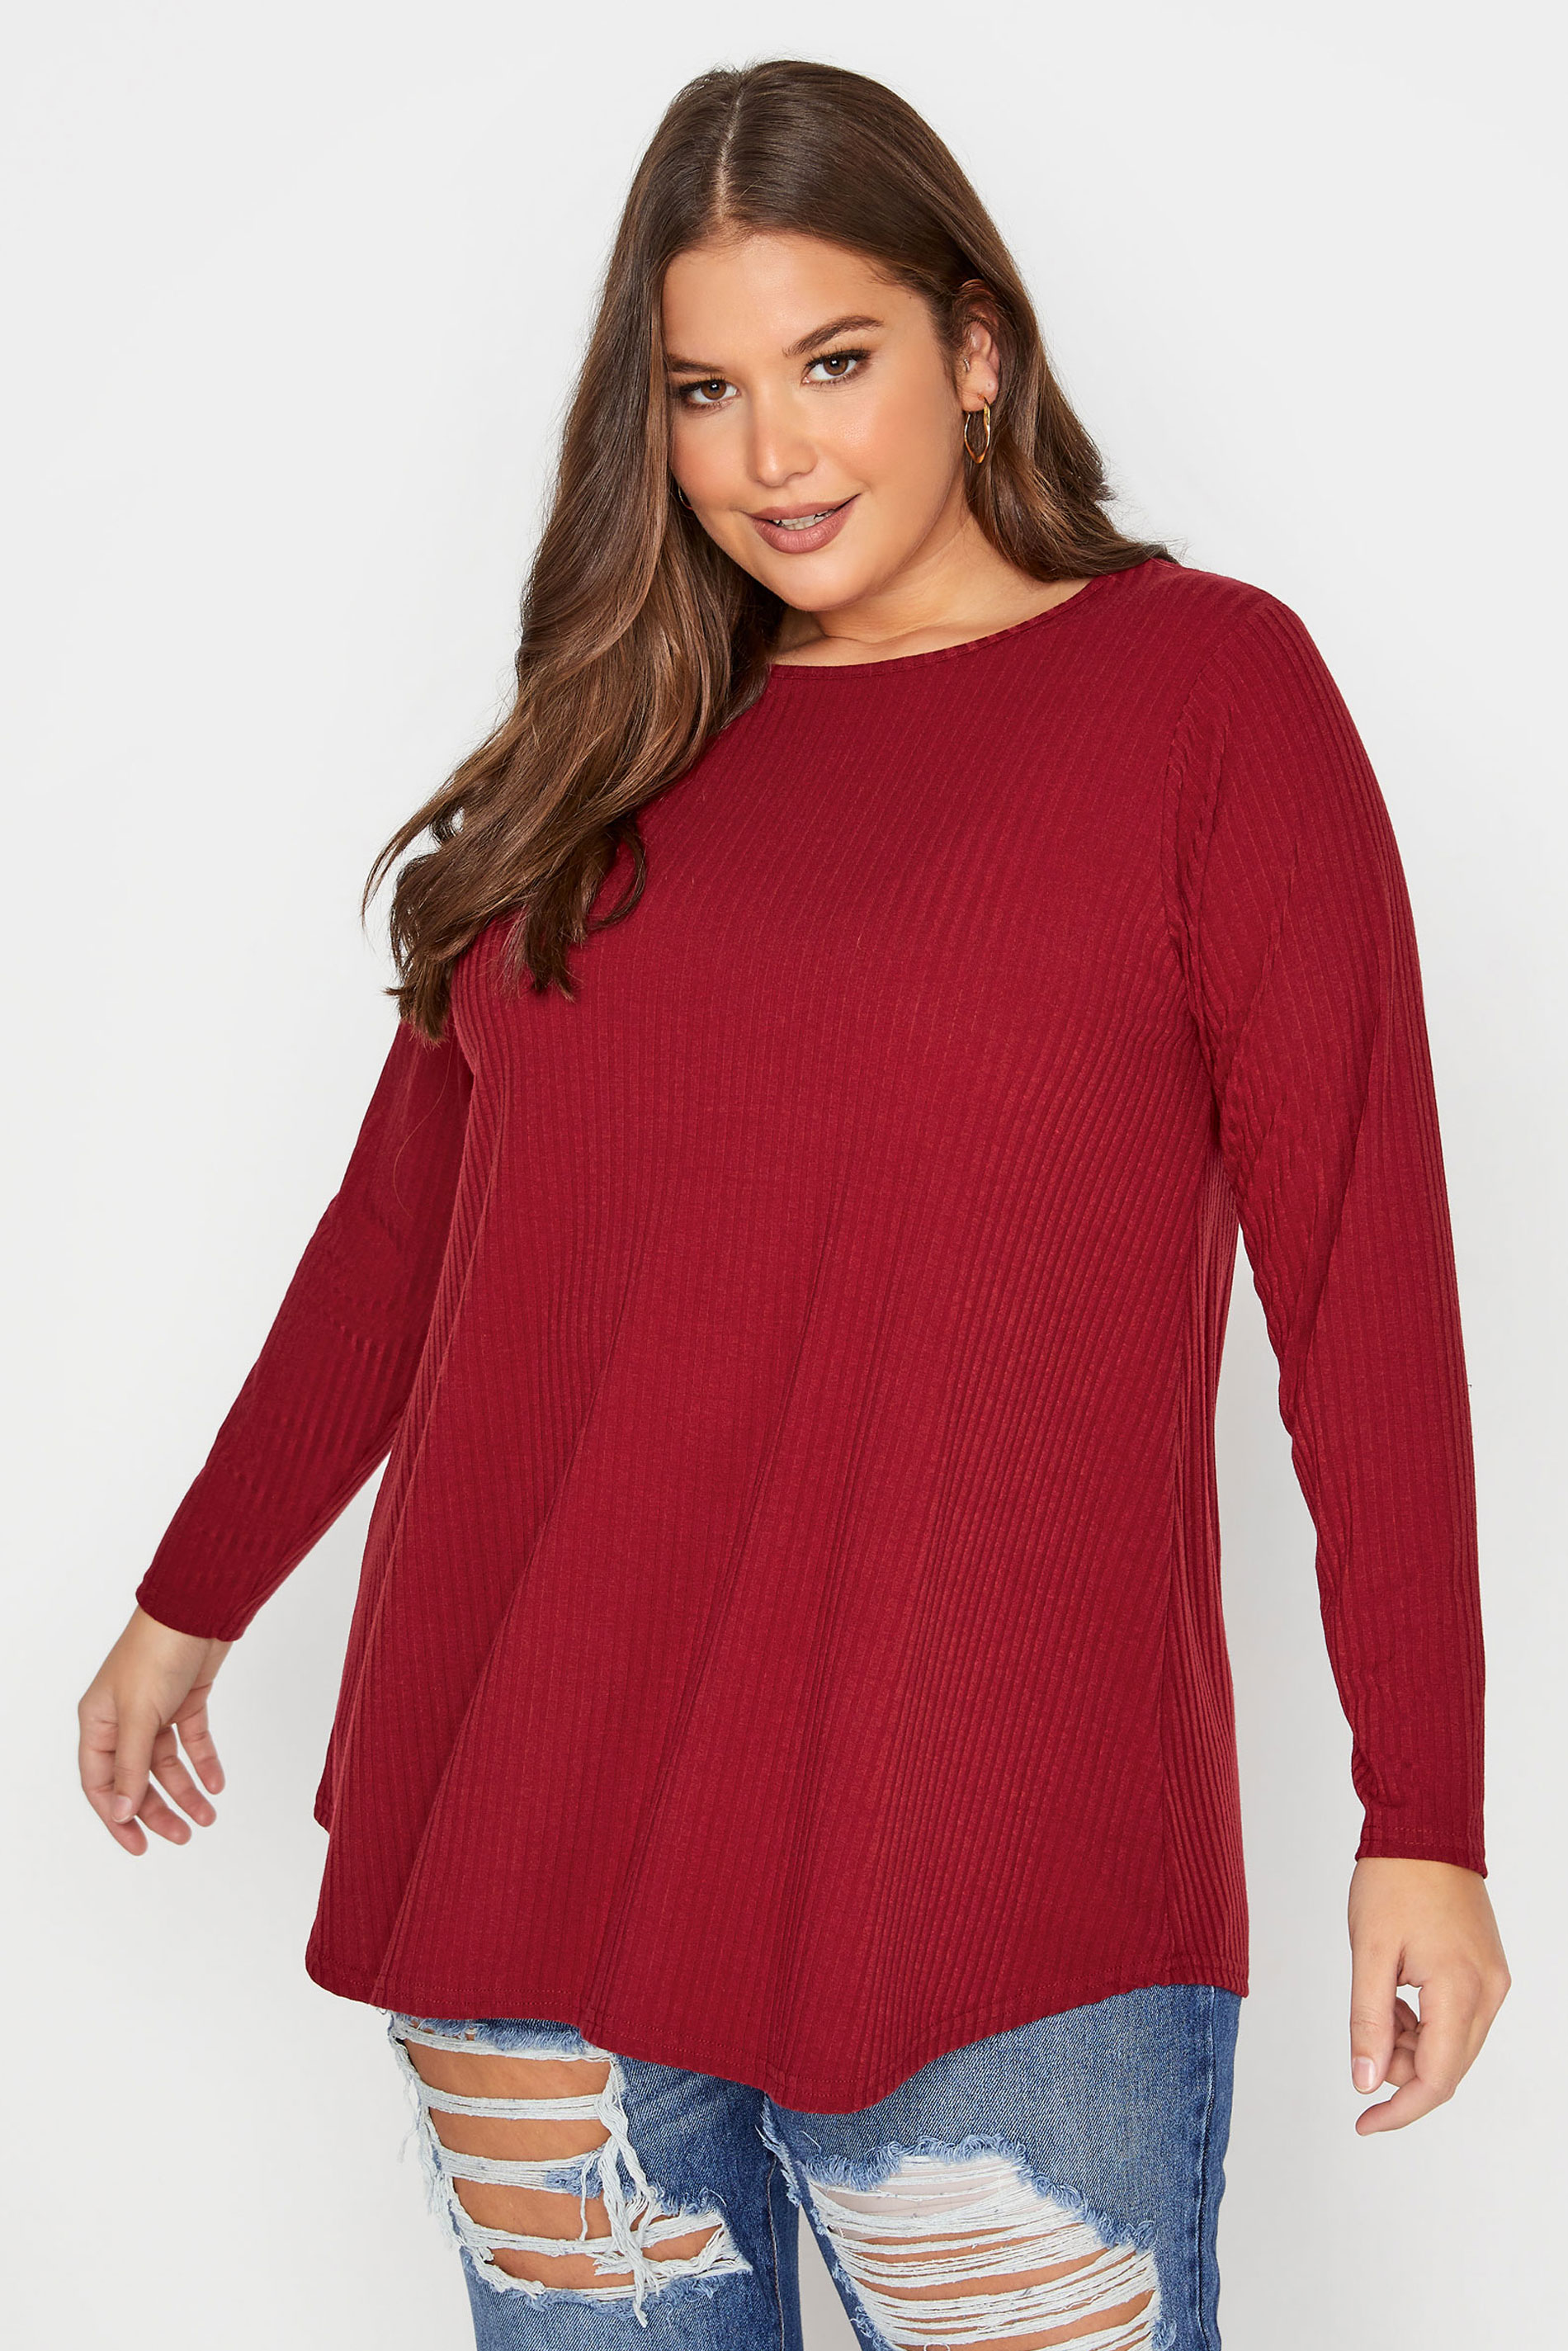 LIMITED COLLECTION Red Long Sleeve Ribbed Top_A.jpg